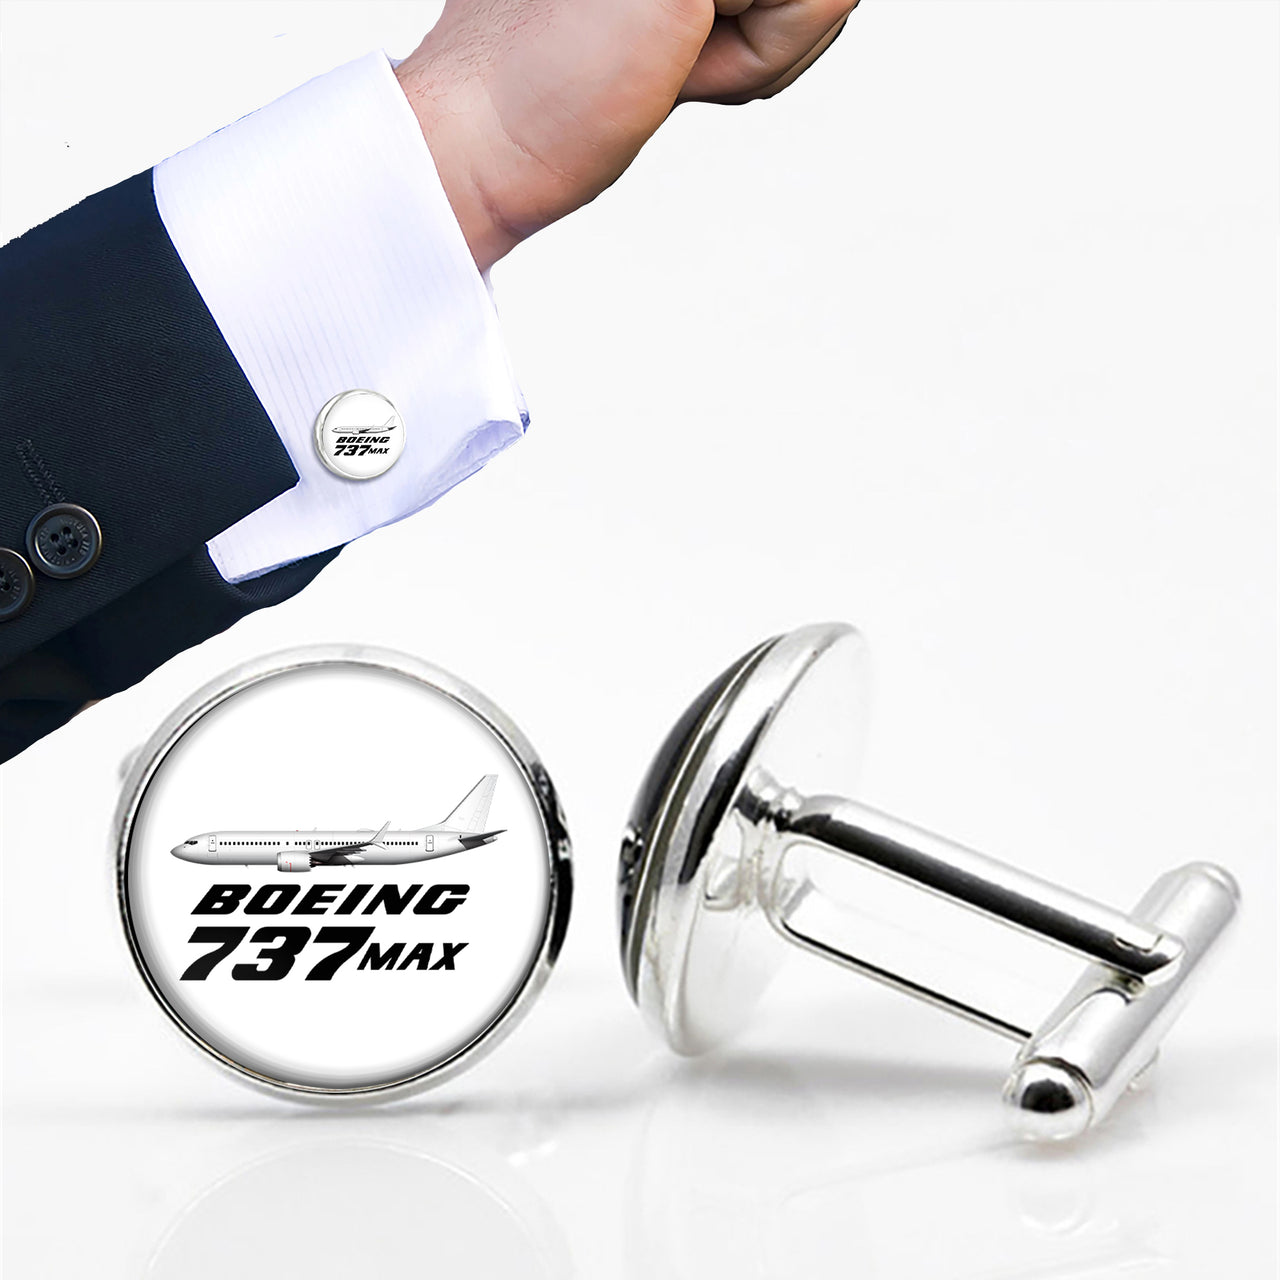 The Boeing 737Max Designed Cuff Links